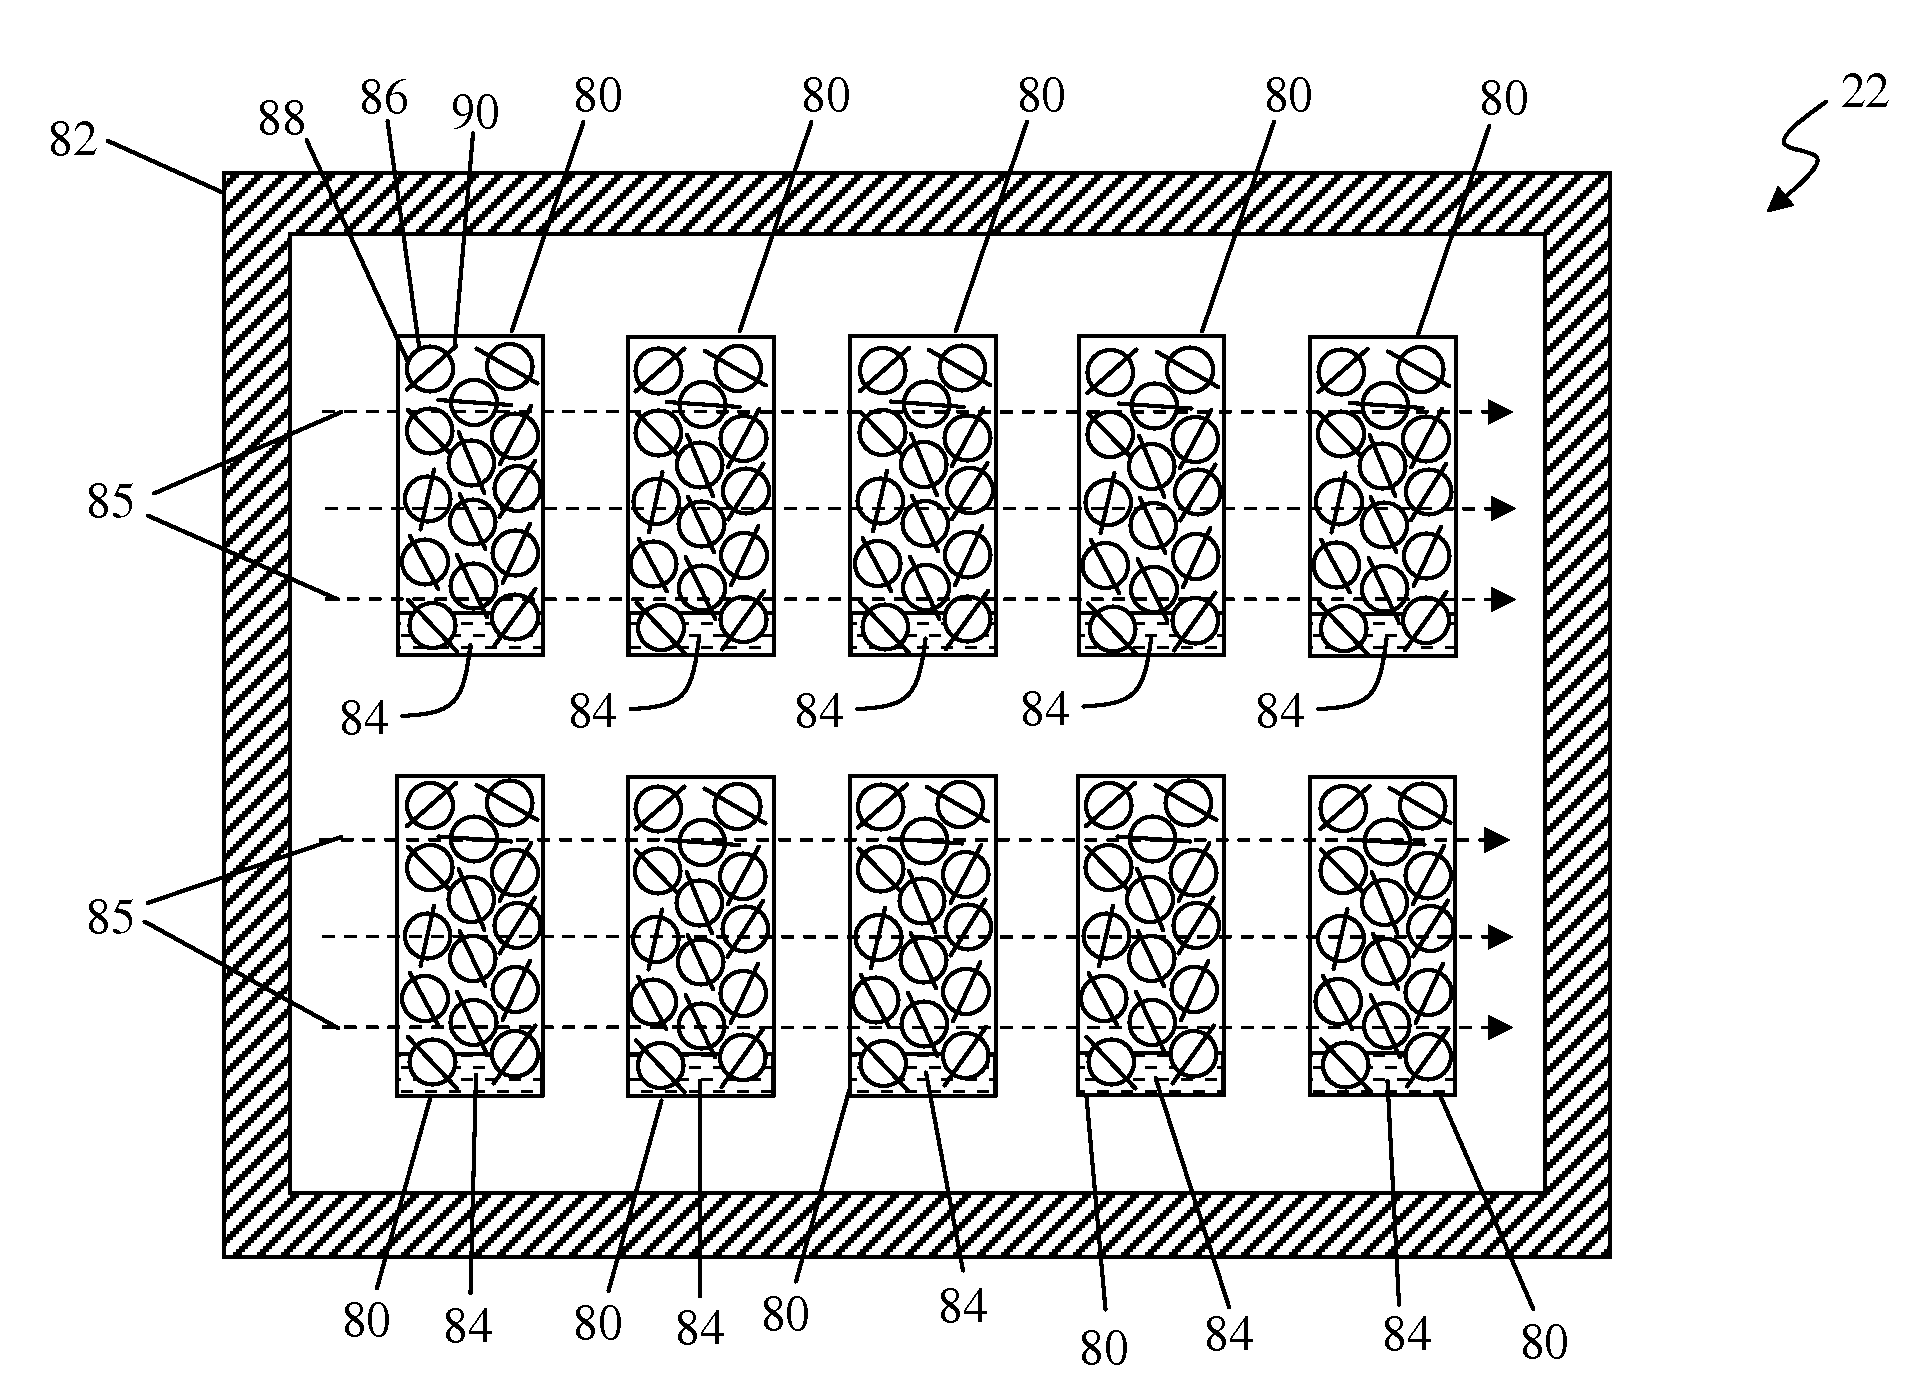 Method of manufacturing embroidered surgical implants